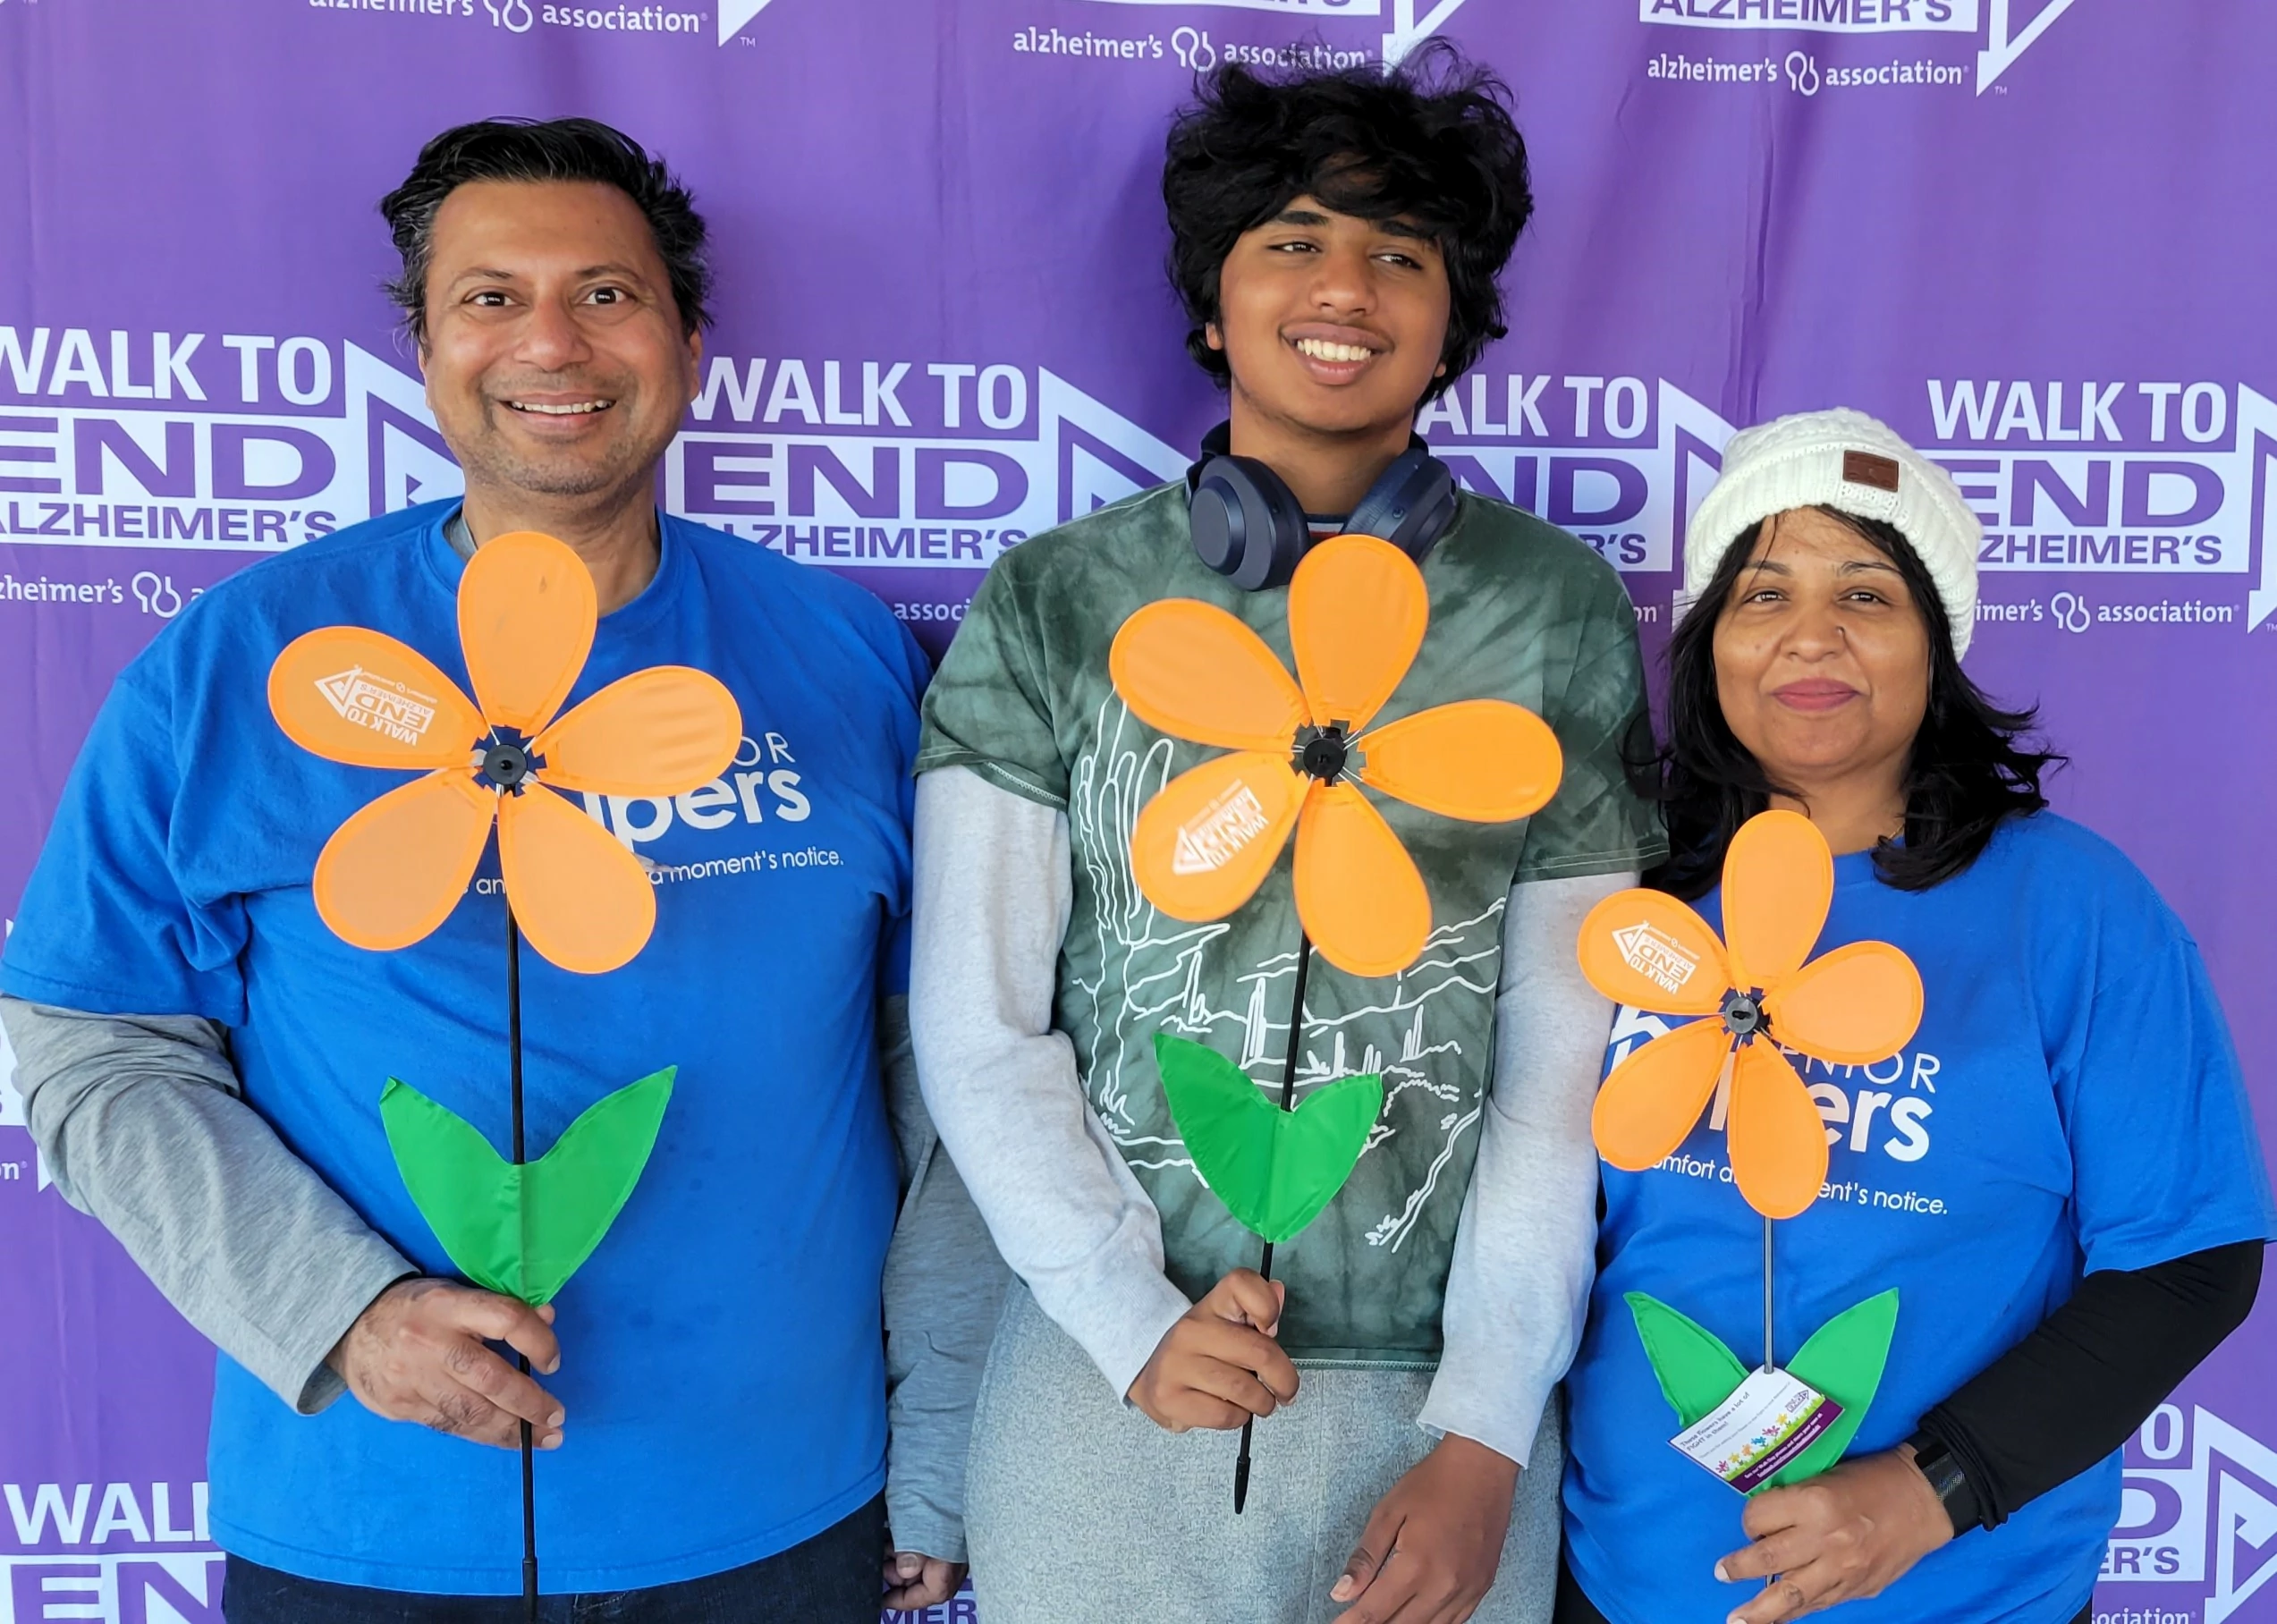 2022, Senior Helpers of Frederick continues to support Alzheimer’s awareness Thanks again for everyone who came out for the #ALZWALK event in Frederick.